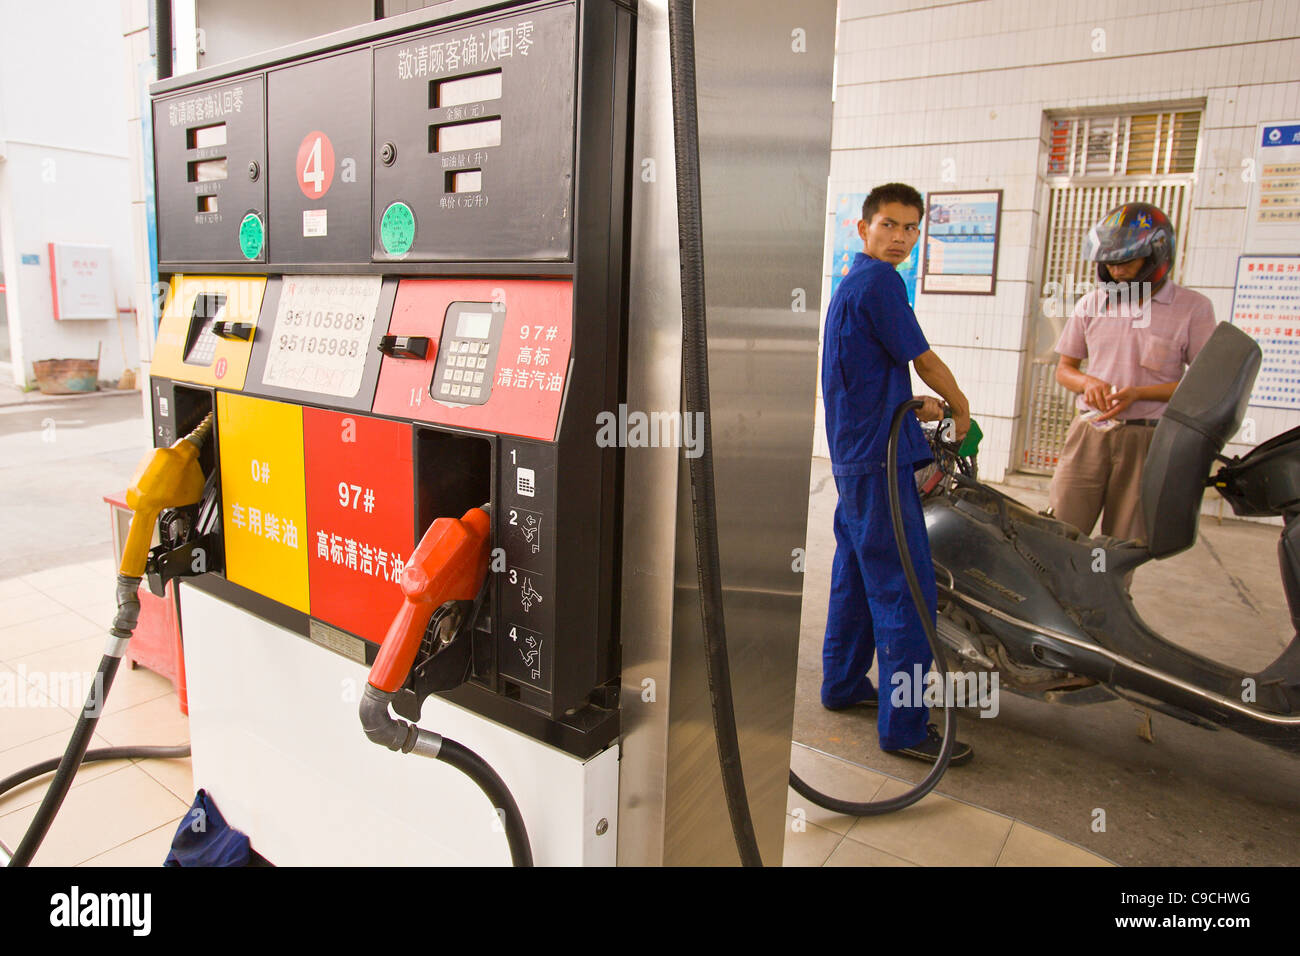 PAN YU, GUANGDONG PROVINCE, CHINA - Gas pump at service station. Attendant fills scooter tank for customer. Stock Photo